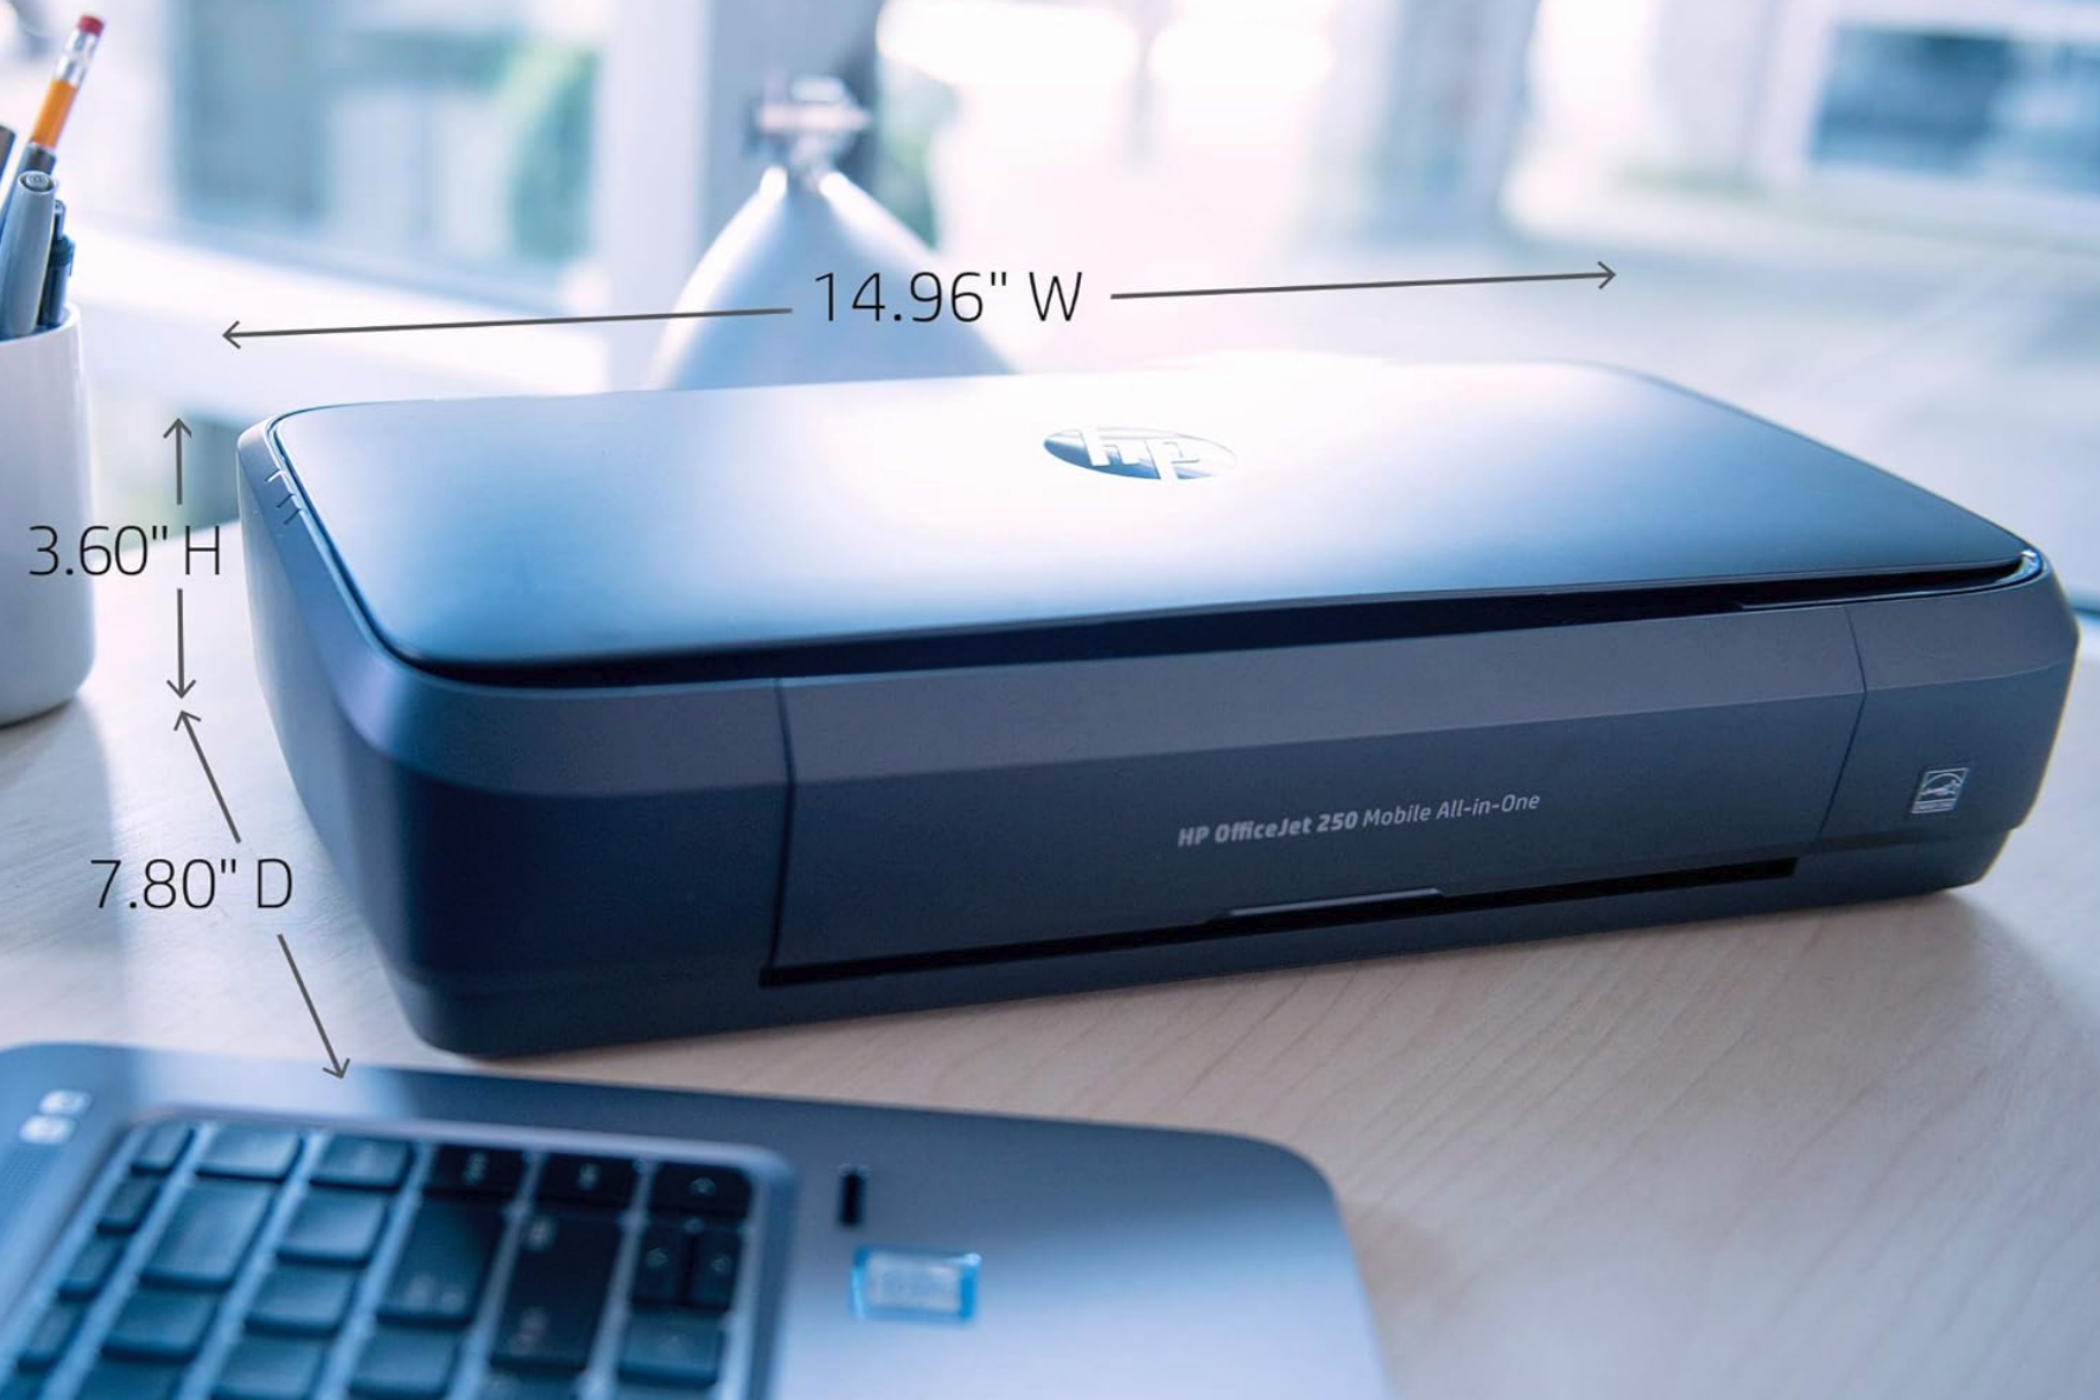 An HP OfficeJet 250 next to a laptop with compact dimensions displayed.